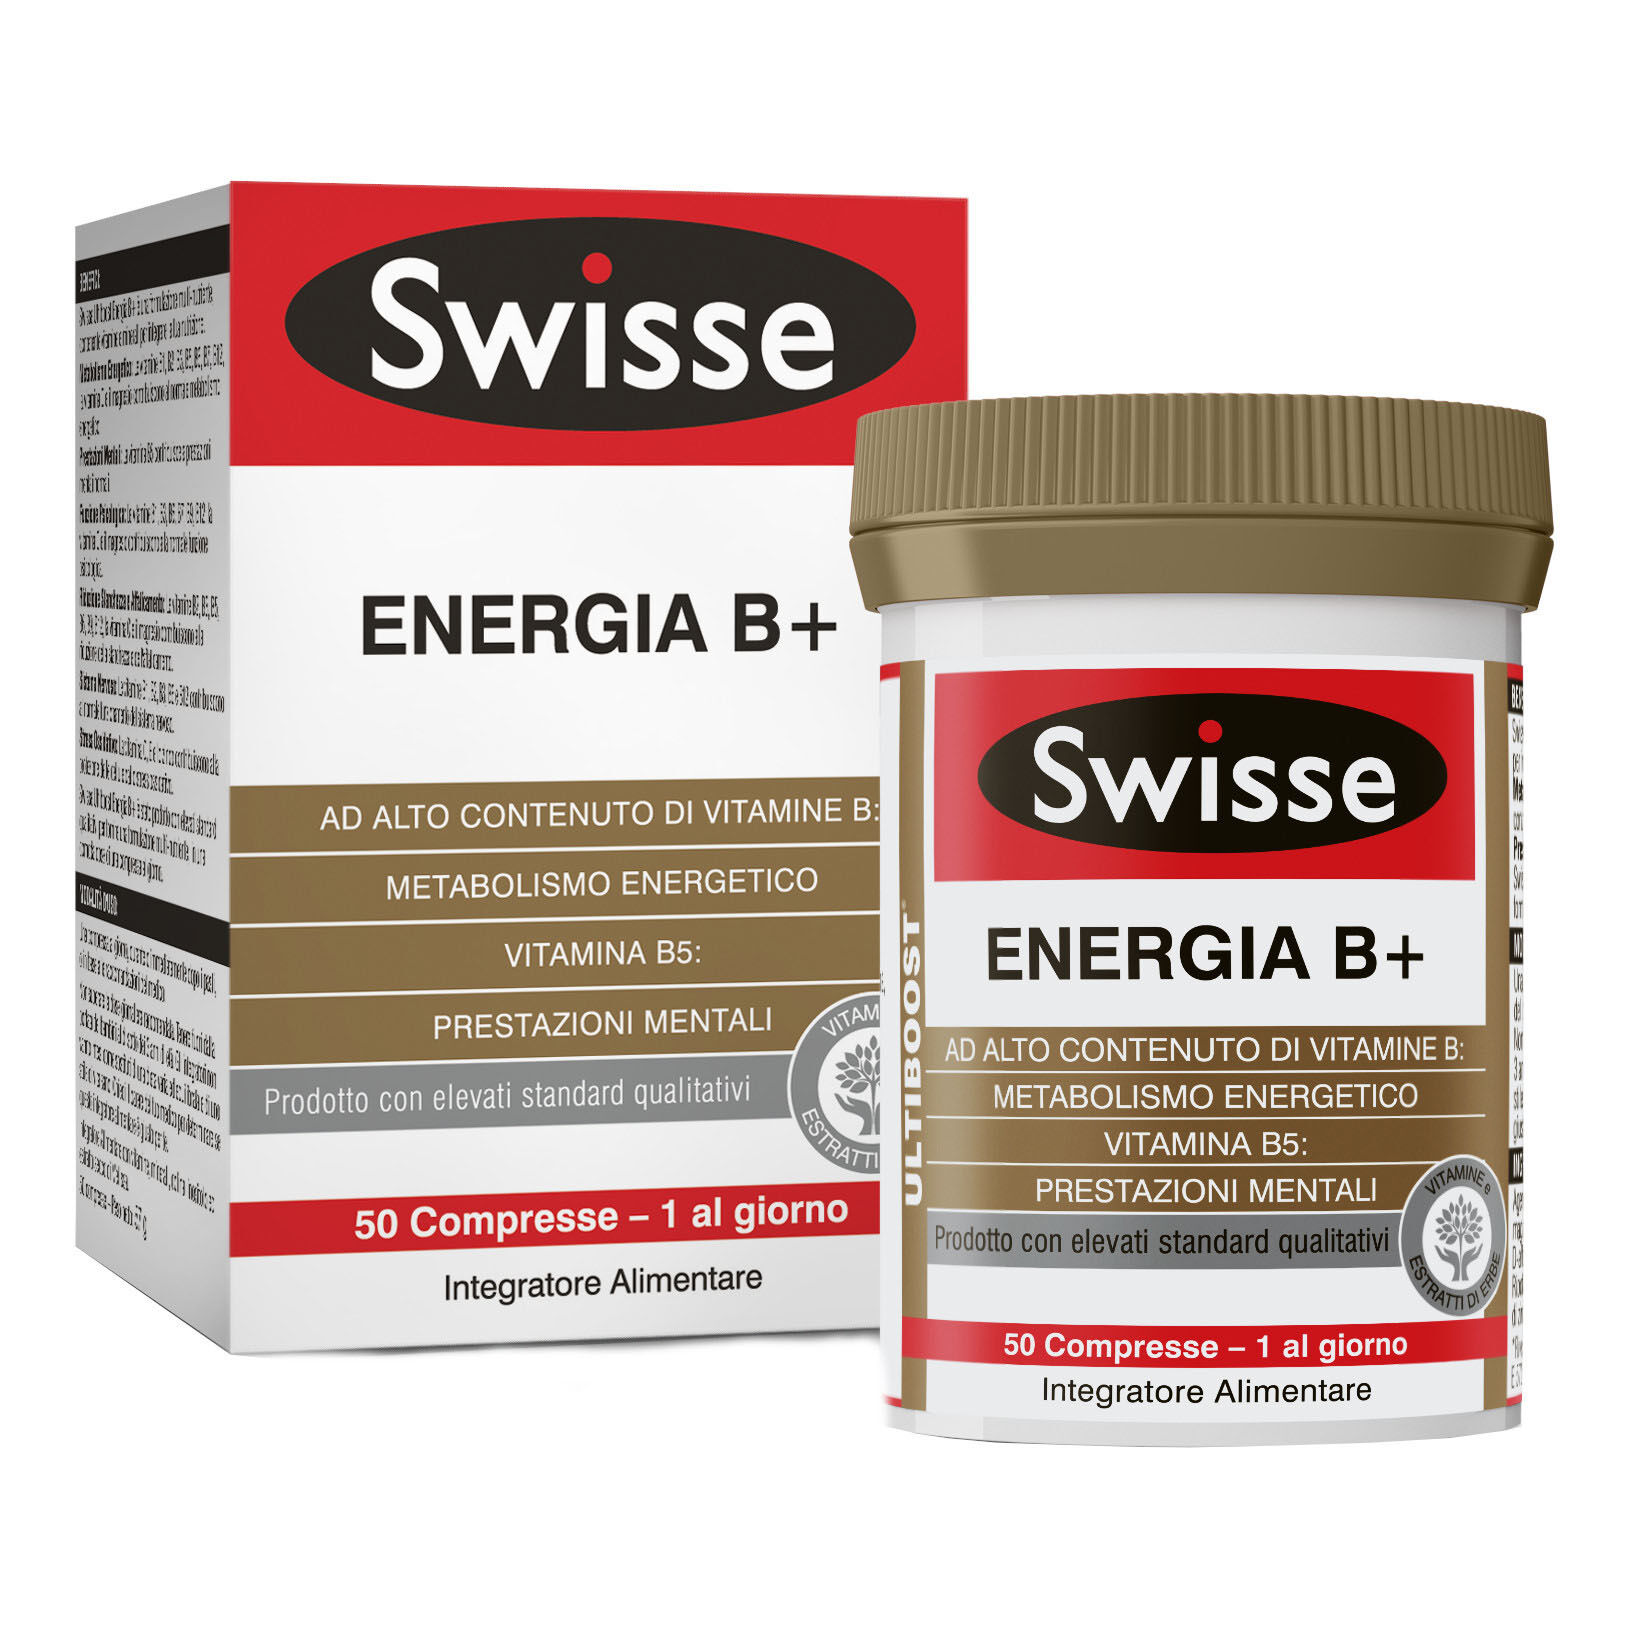 health and happiness (h&h) it. swisse energie b + 50 compresse